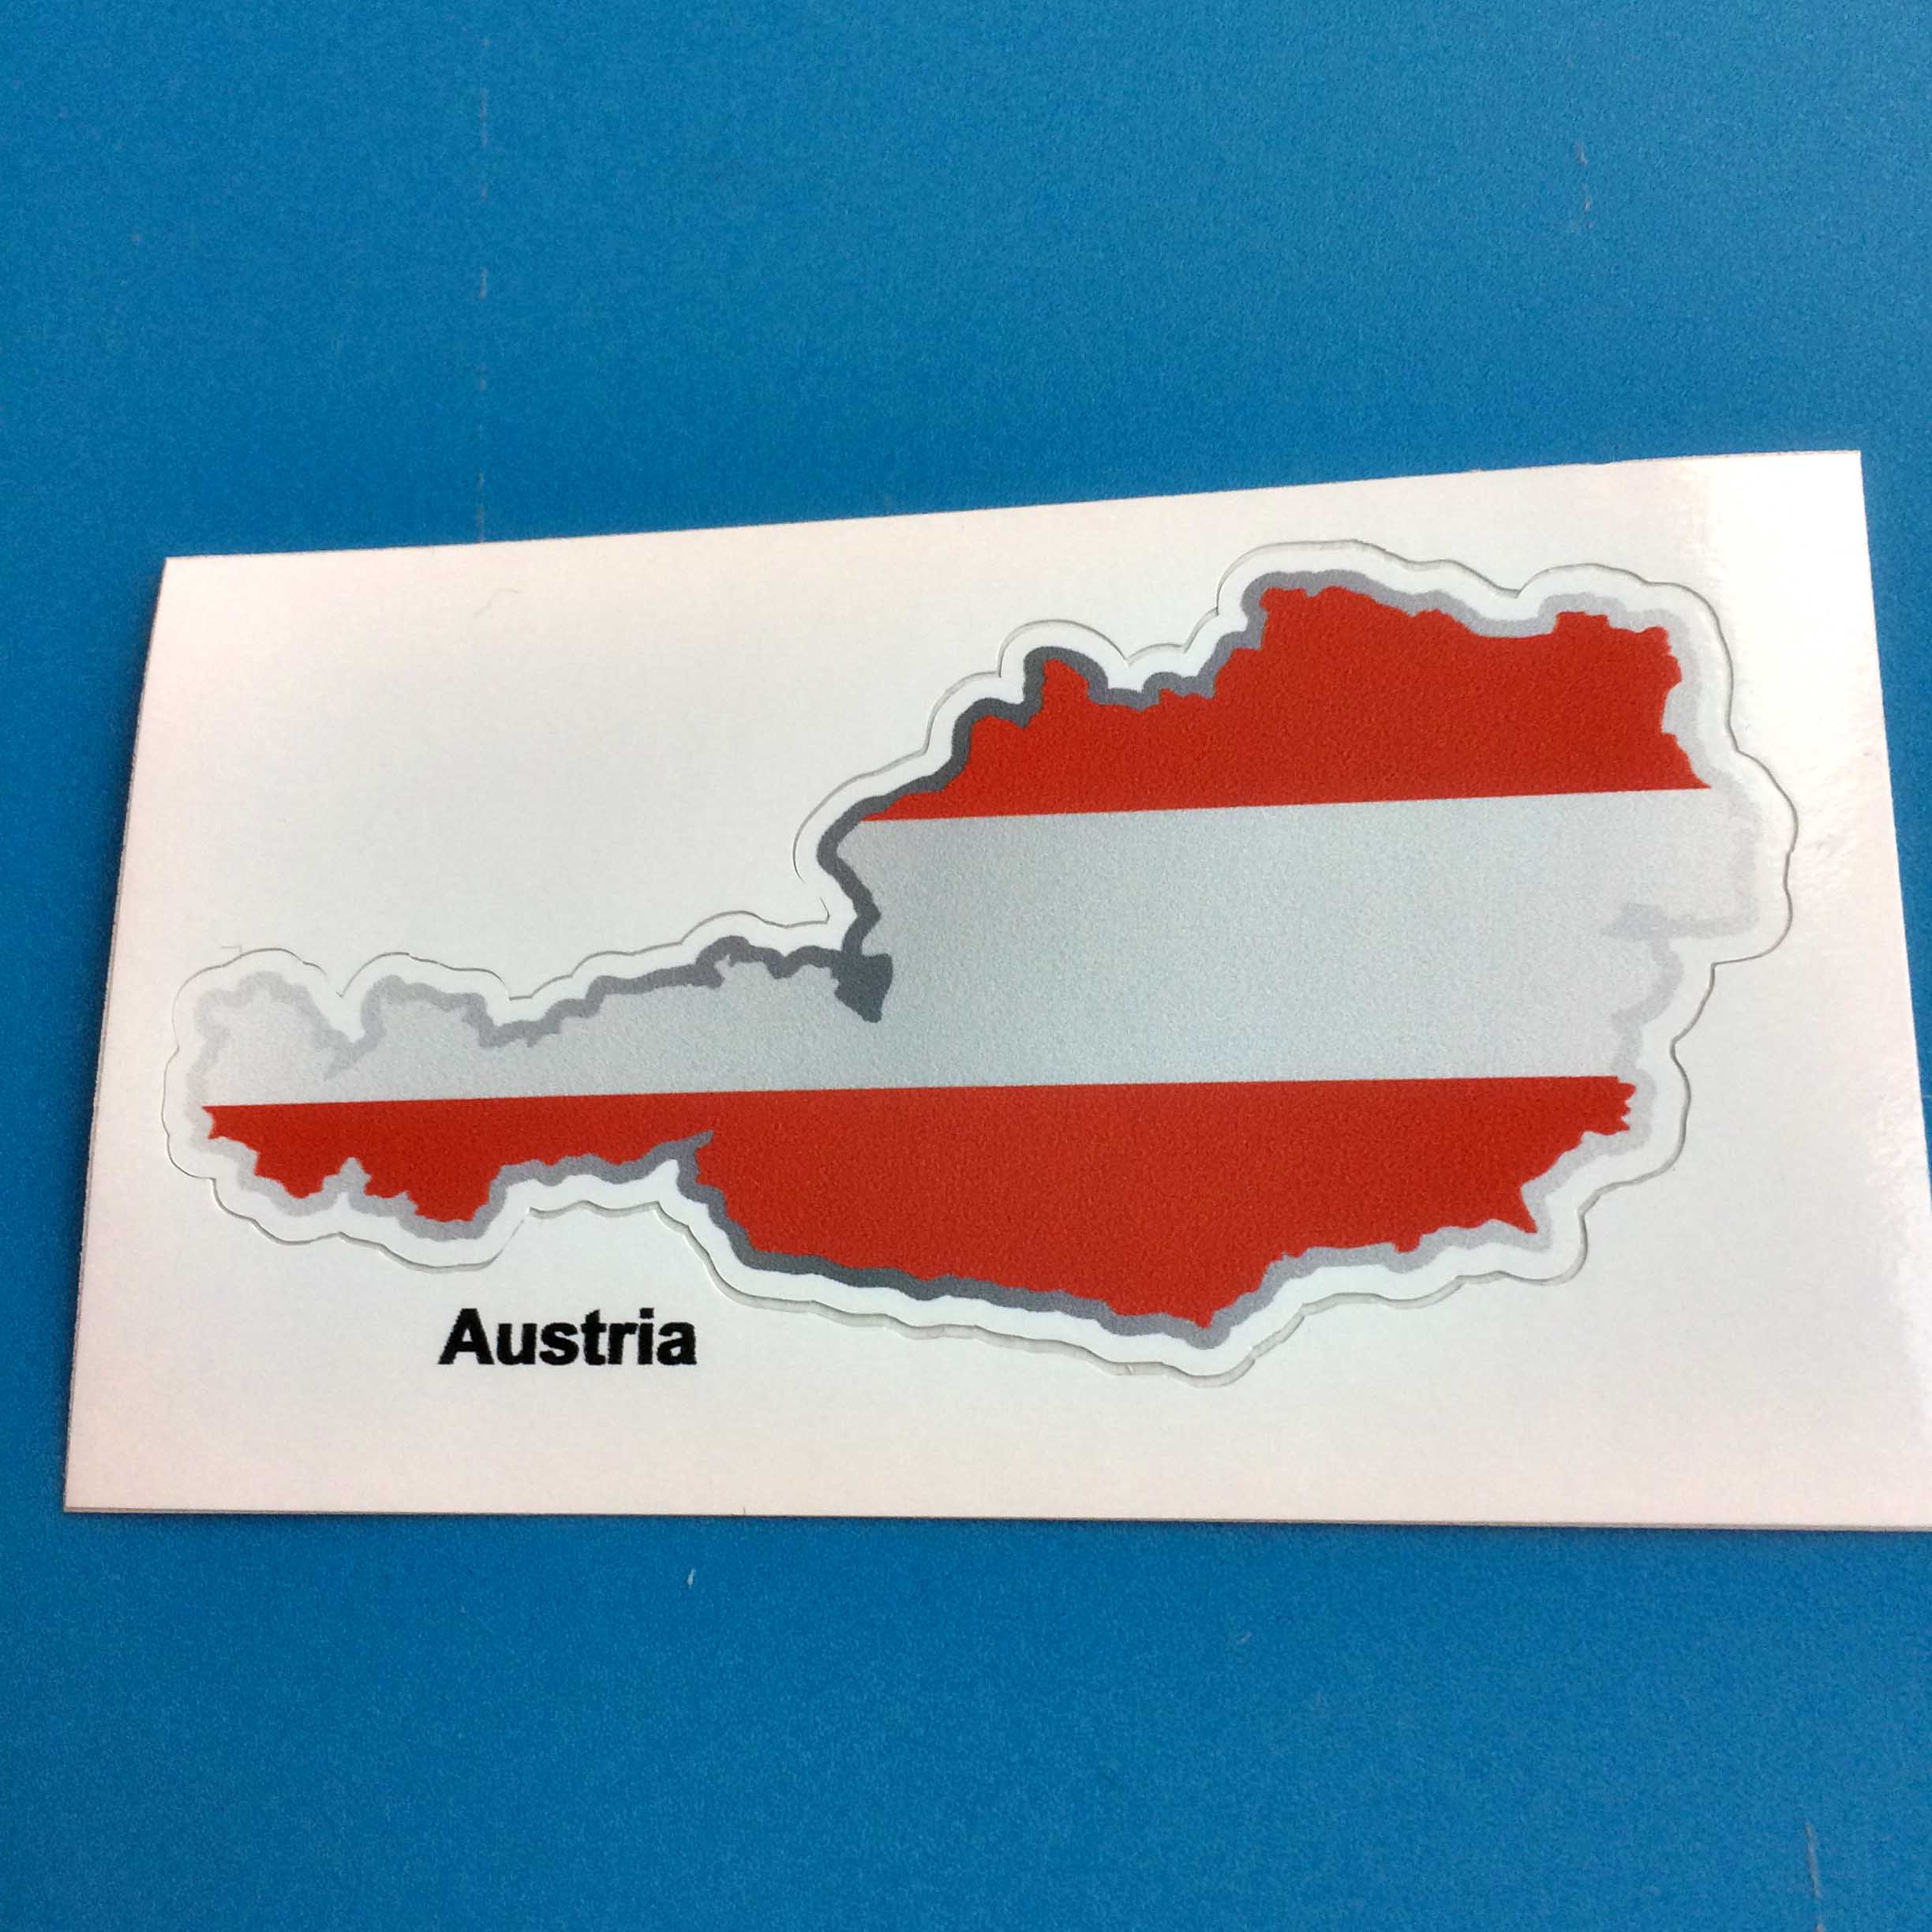 Red and white Austria flag and map.